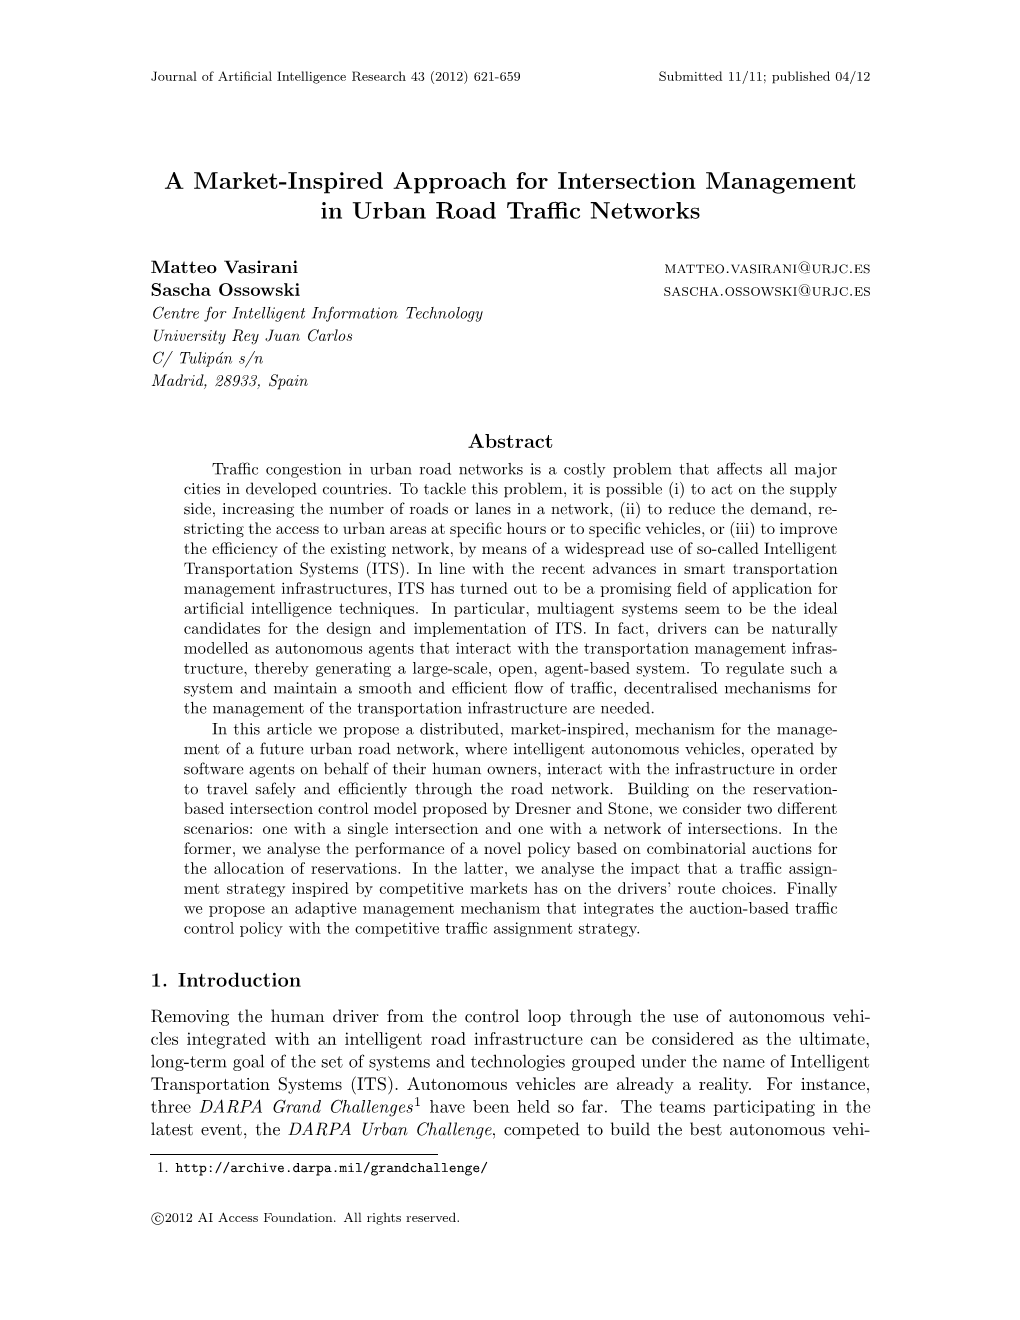 A Market-Inspired Approach for Intersection Management in Urban Road Traffic Networks